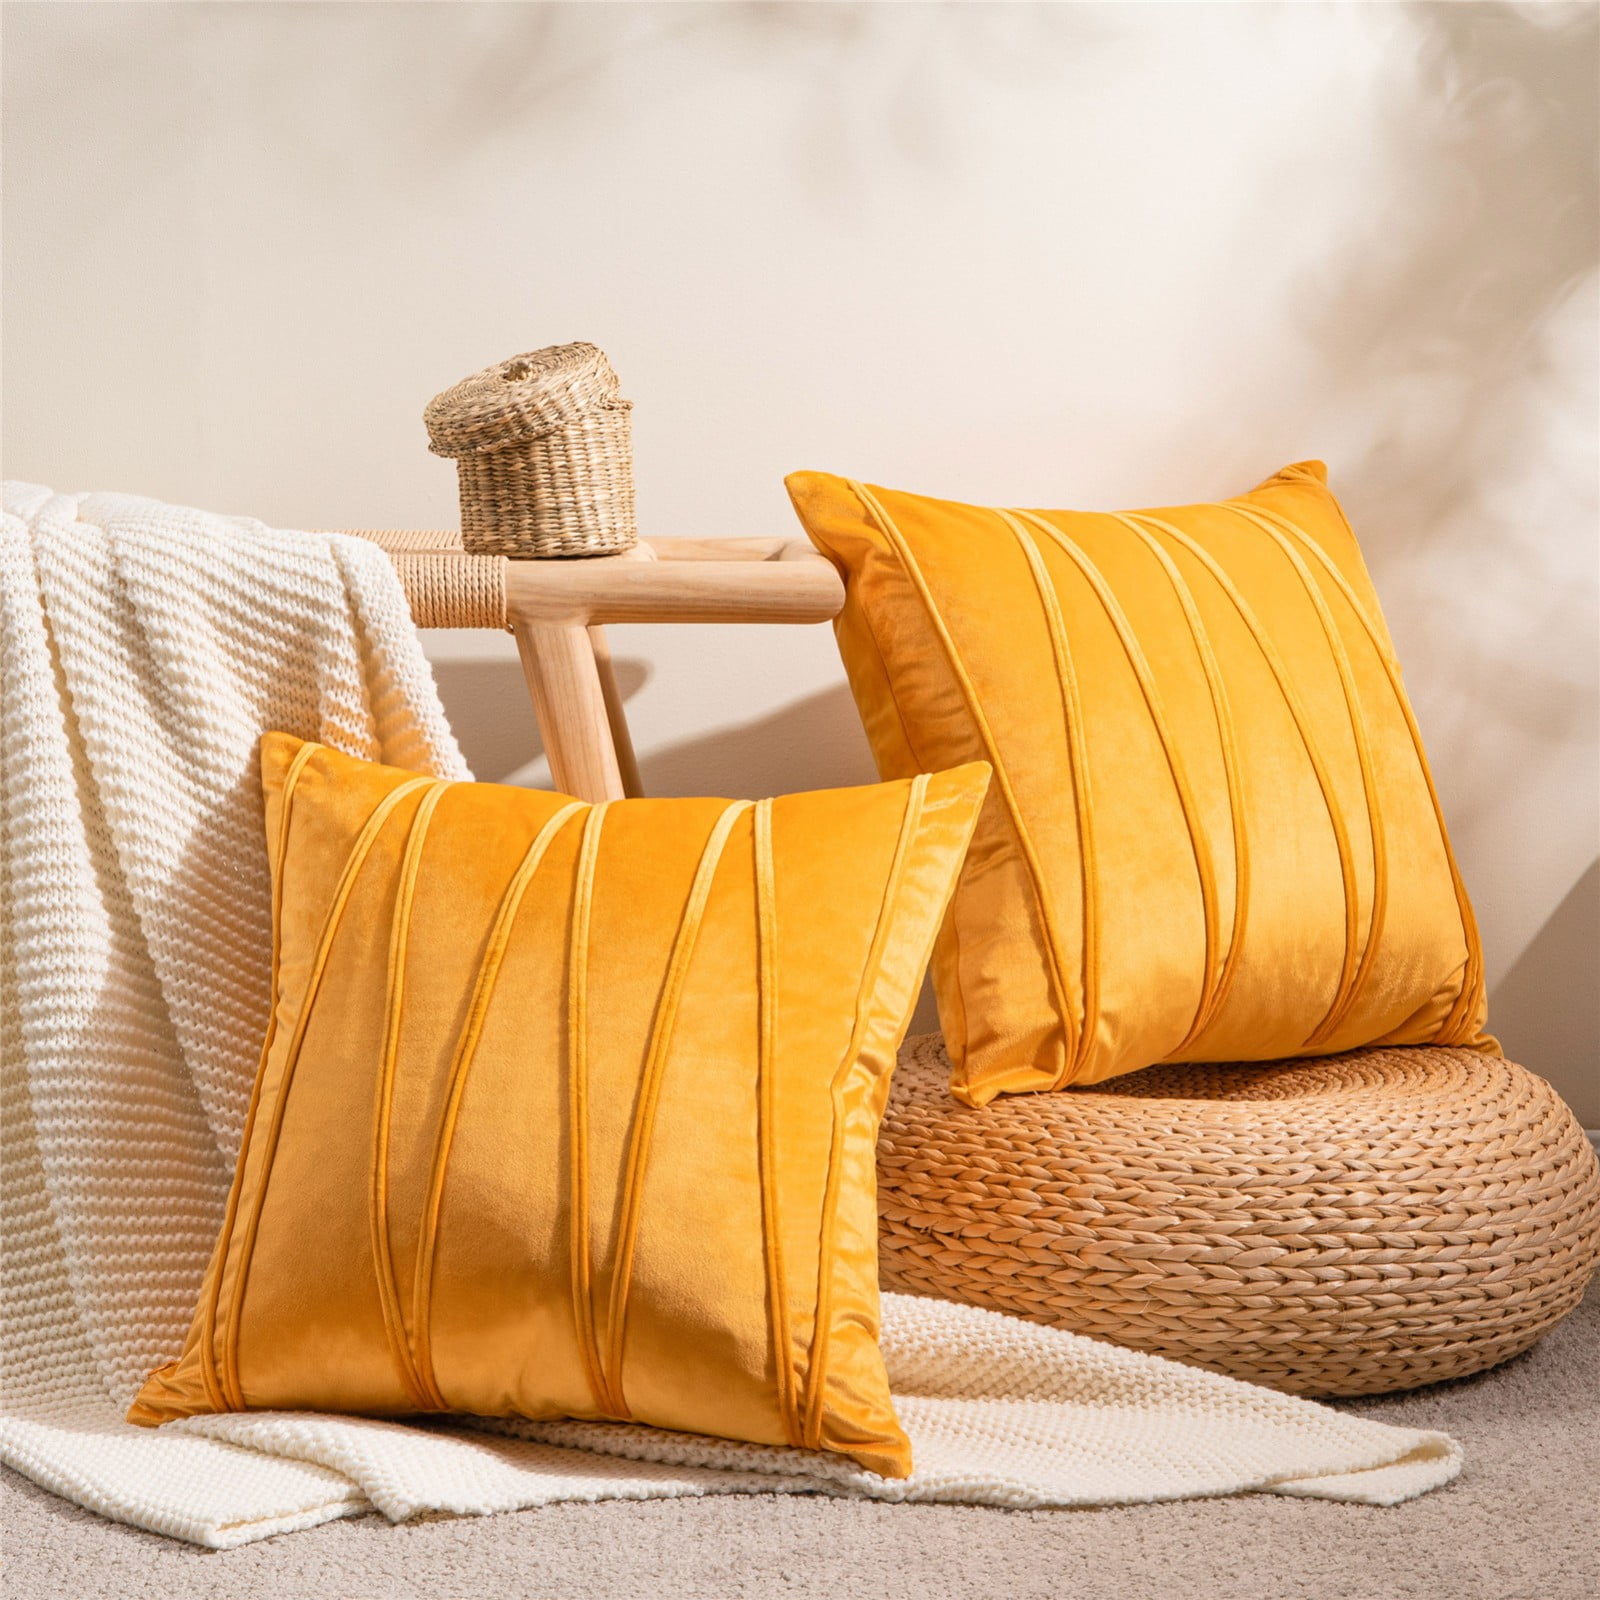 Faux Suede Cushion Cover Contemporary 40x40 cm Striped Throw Mustard Yellow Cushion Cover 16x16 inch Cushion Cover Textured Pintucks Solid Color Contemporary Mustard Yellow